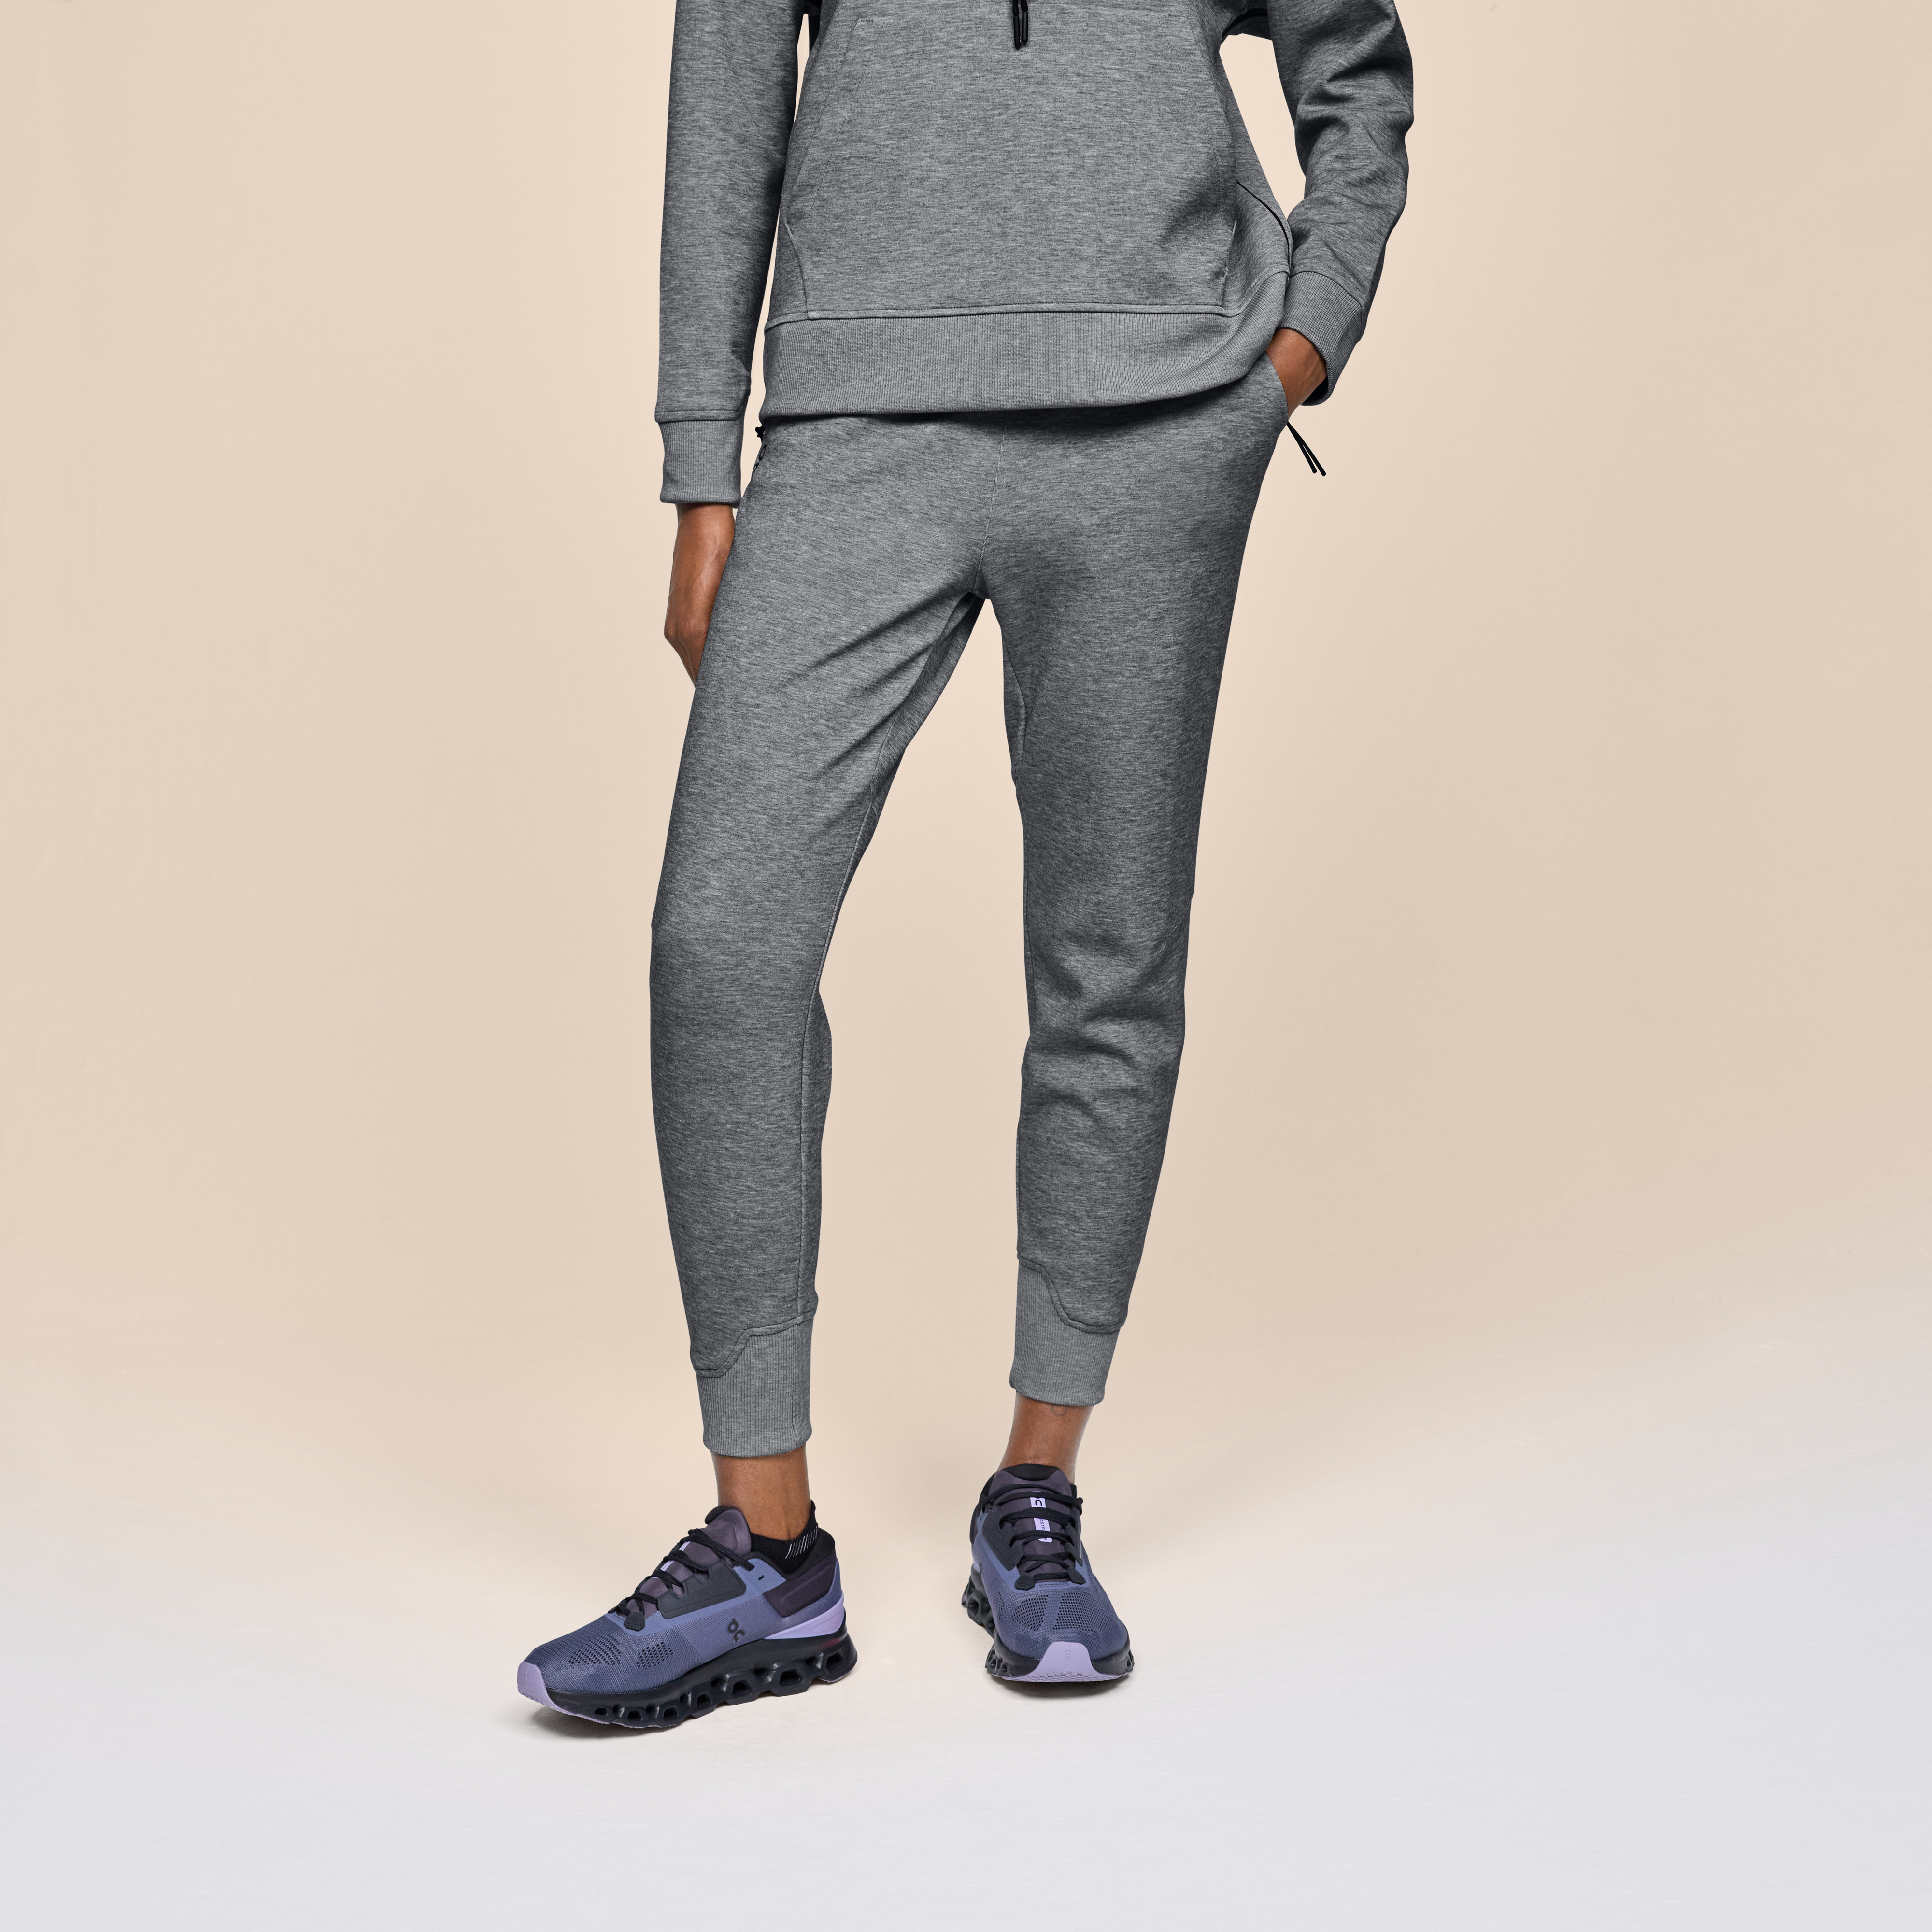 On Sweat Pants Grey Women Women – Recovery, pre- or post-workout, soft comfort Pants